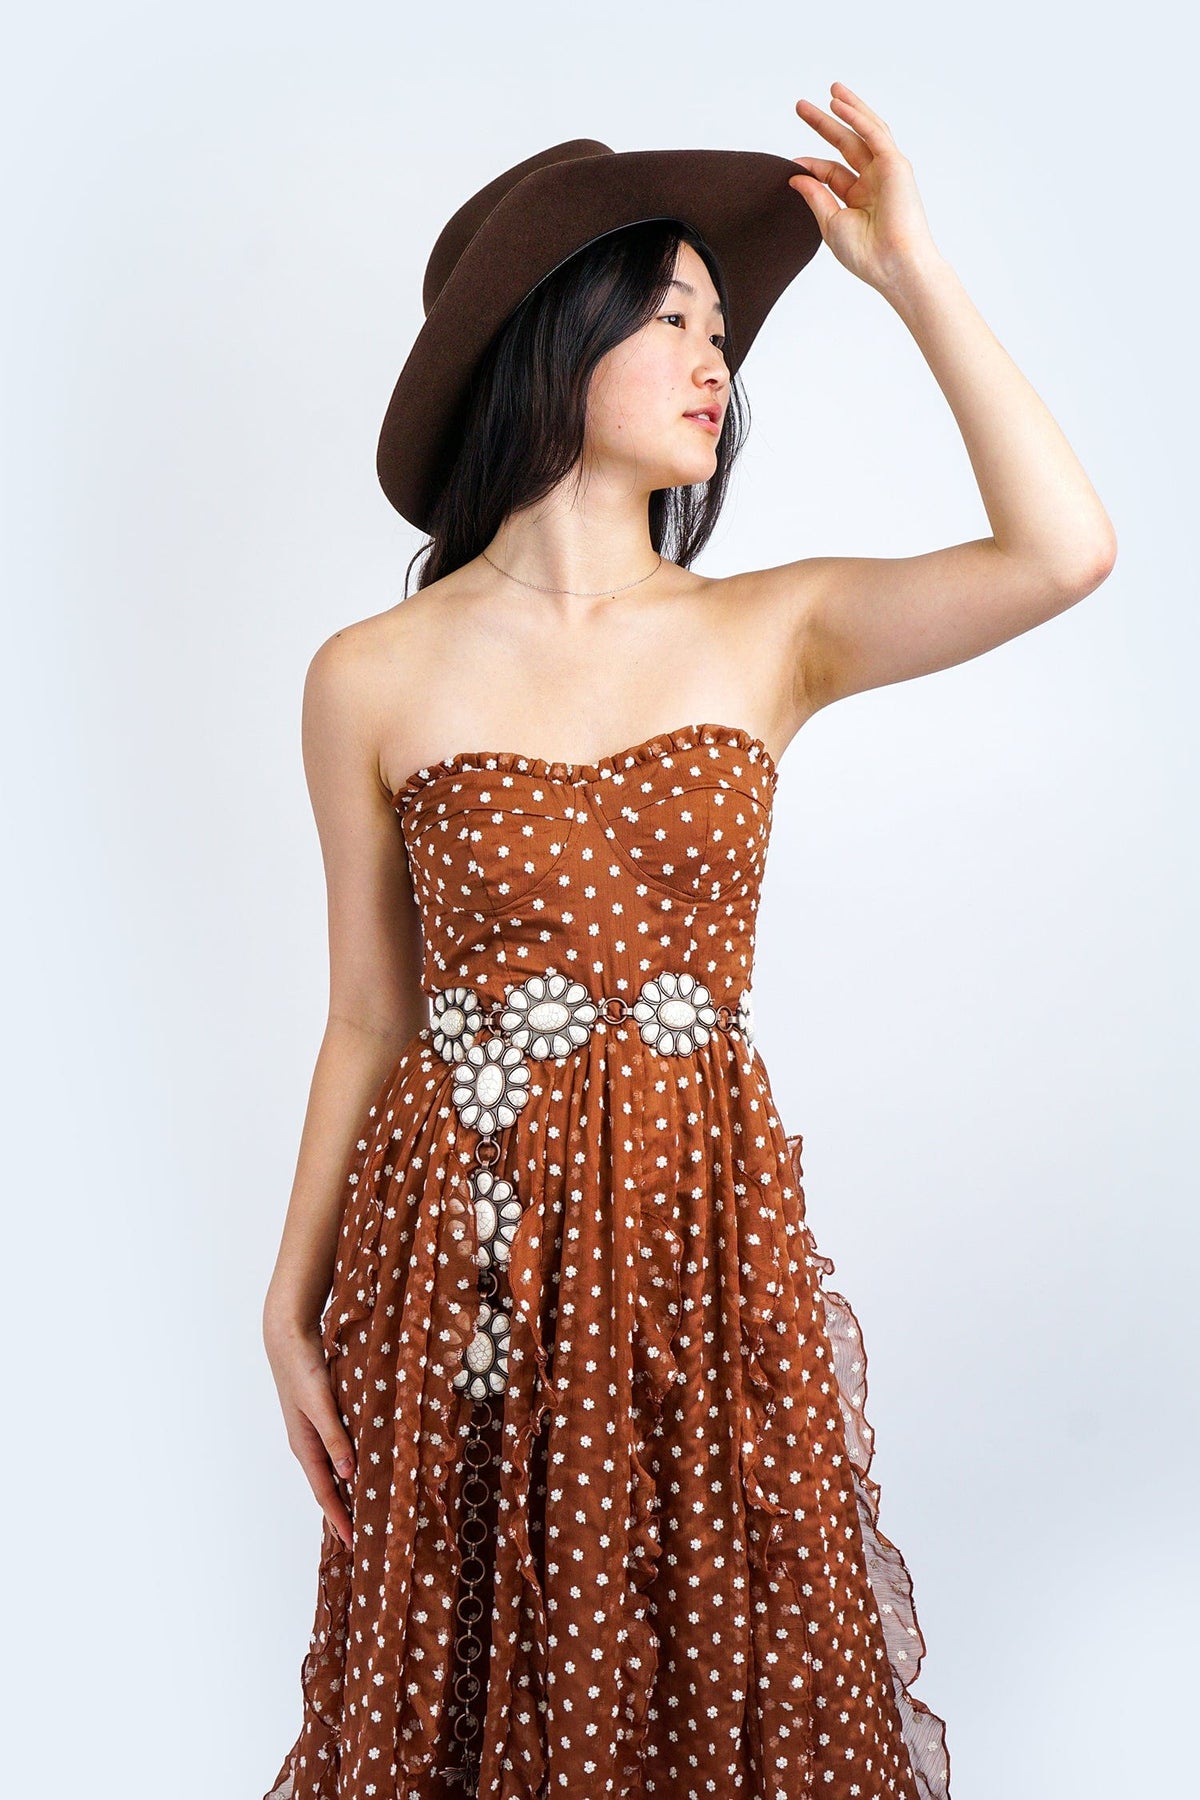 DCD DRESSES Brown and White Embroidered Polka Dot Ruffle Maxi Dress